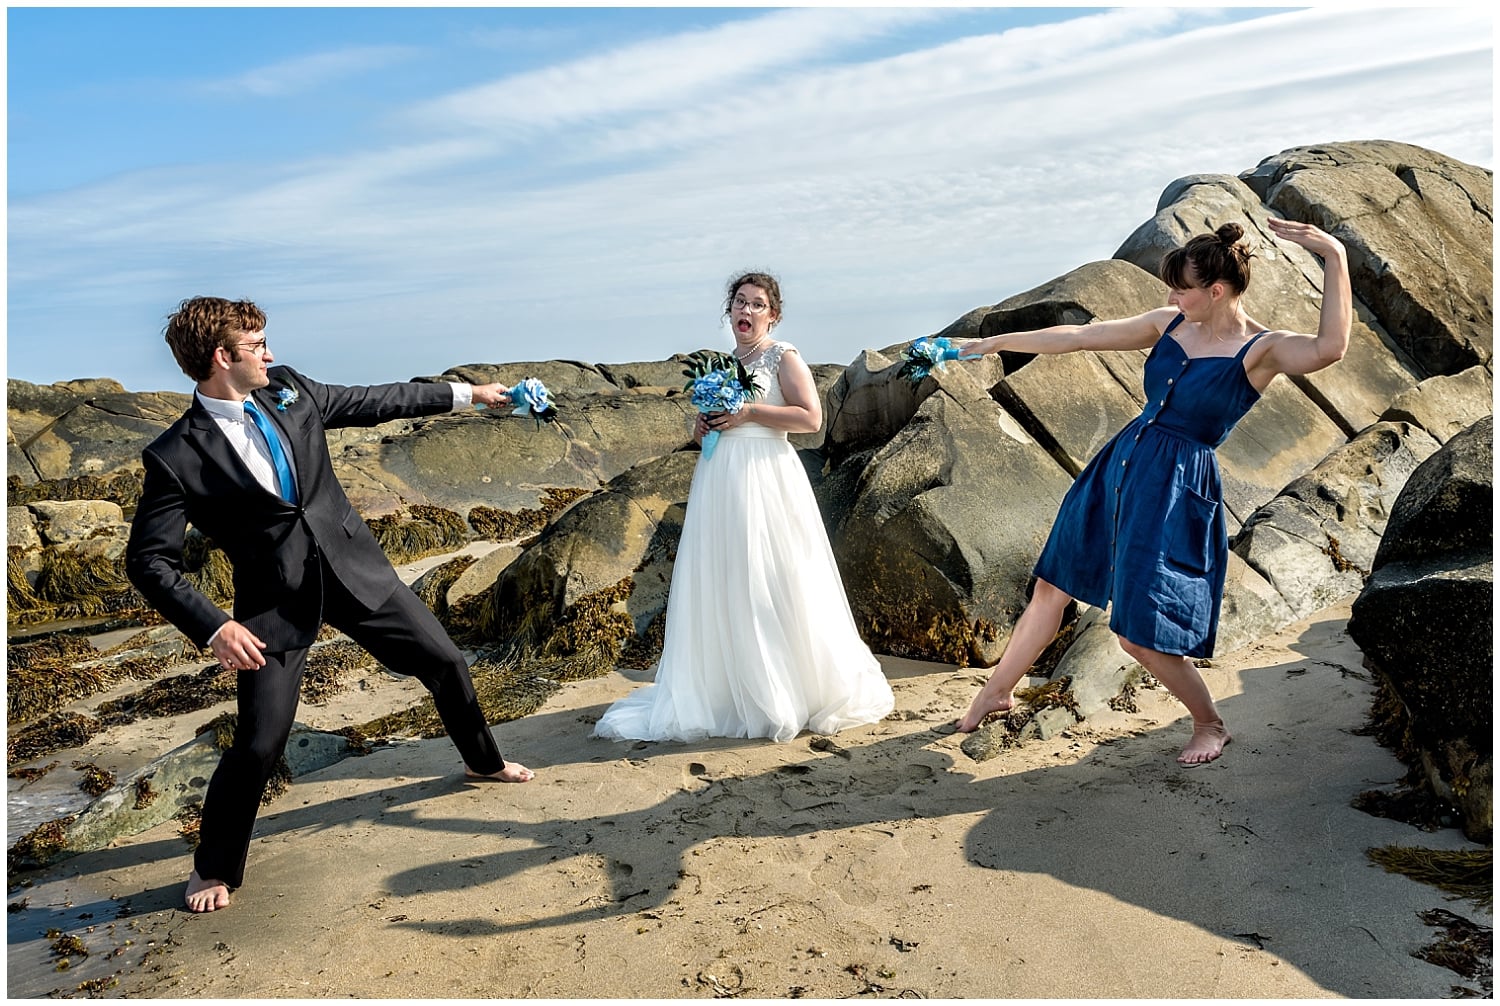 A Harry Potter themed wedding party photo pose during a beach wedding in Green Bay NS with the bride and bridesmaids.